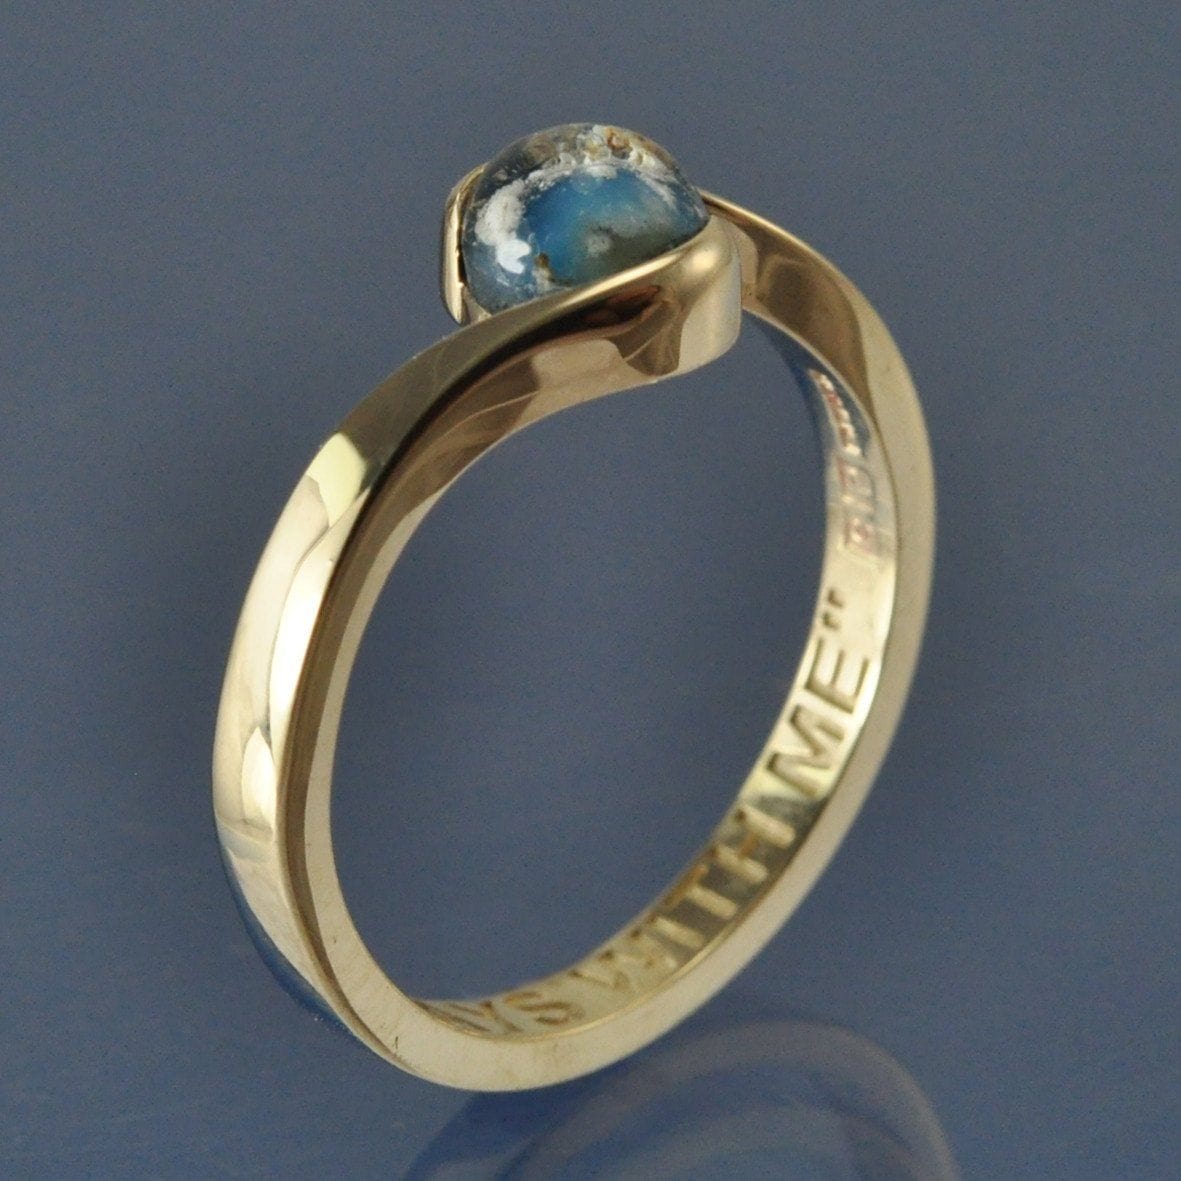 Cremation Ash Ring - Ashes Into Glass Crossover Design Ring by Chris Parry Jewellery